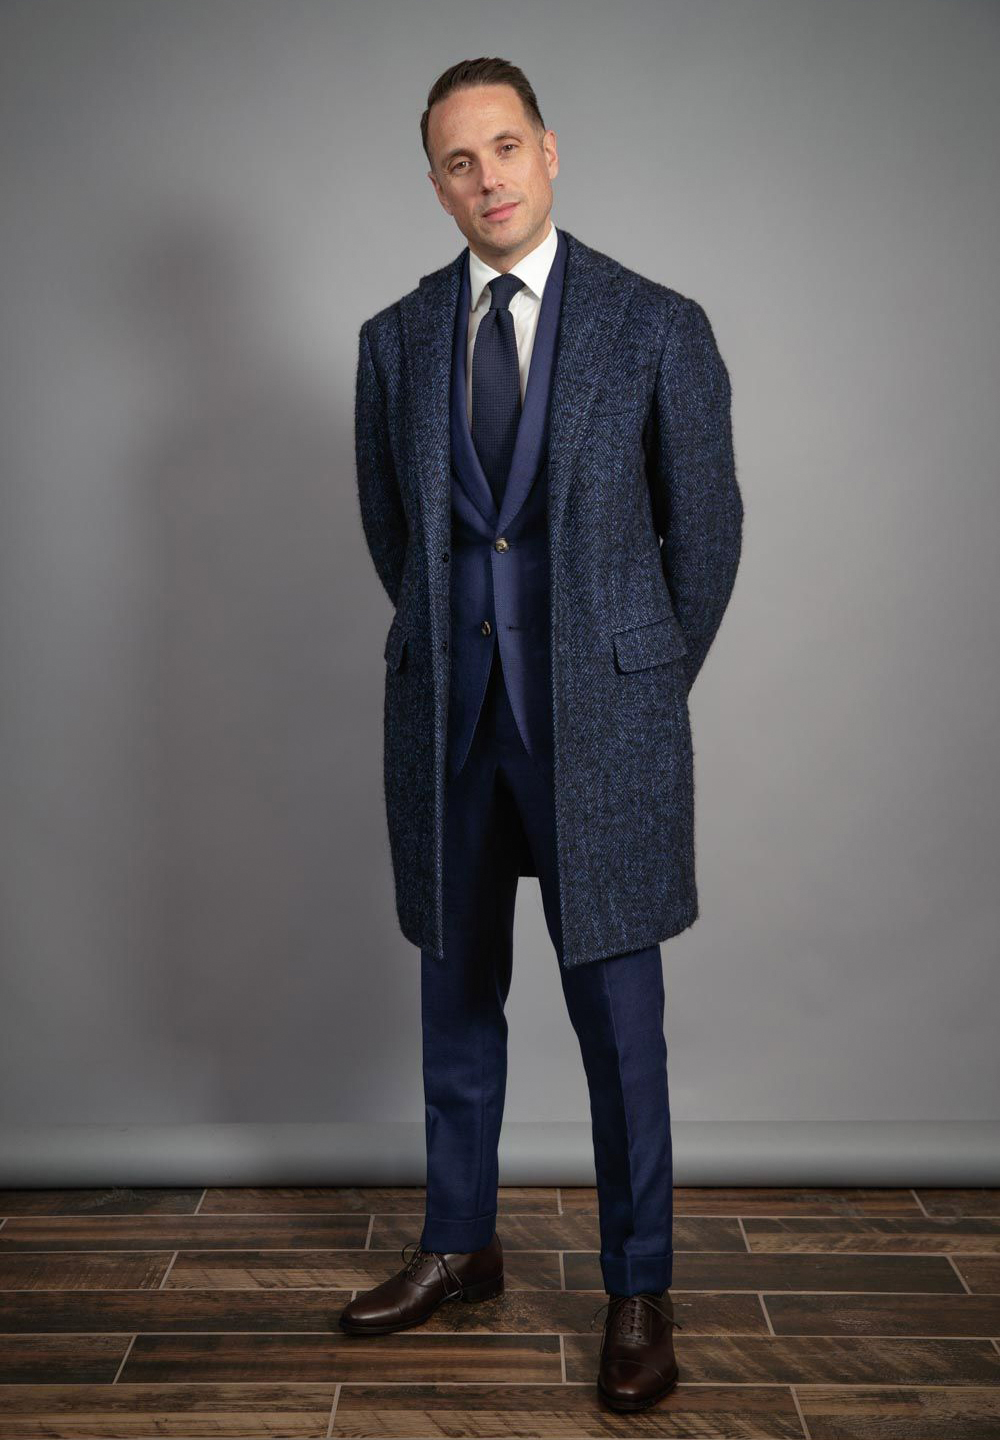 navy suit, navy overcoat, and brown shoes